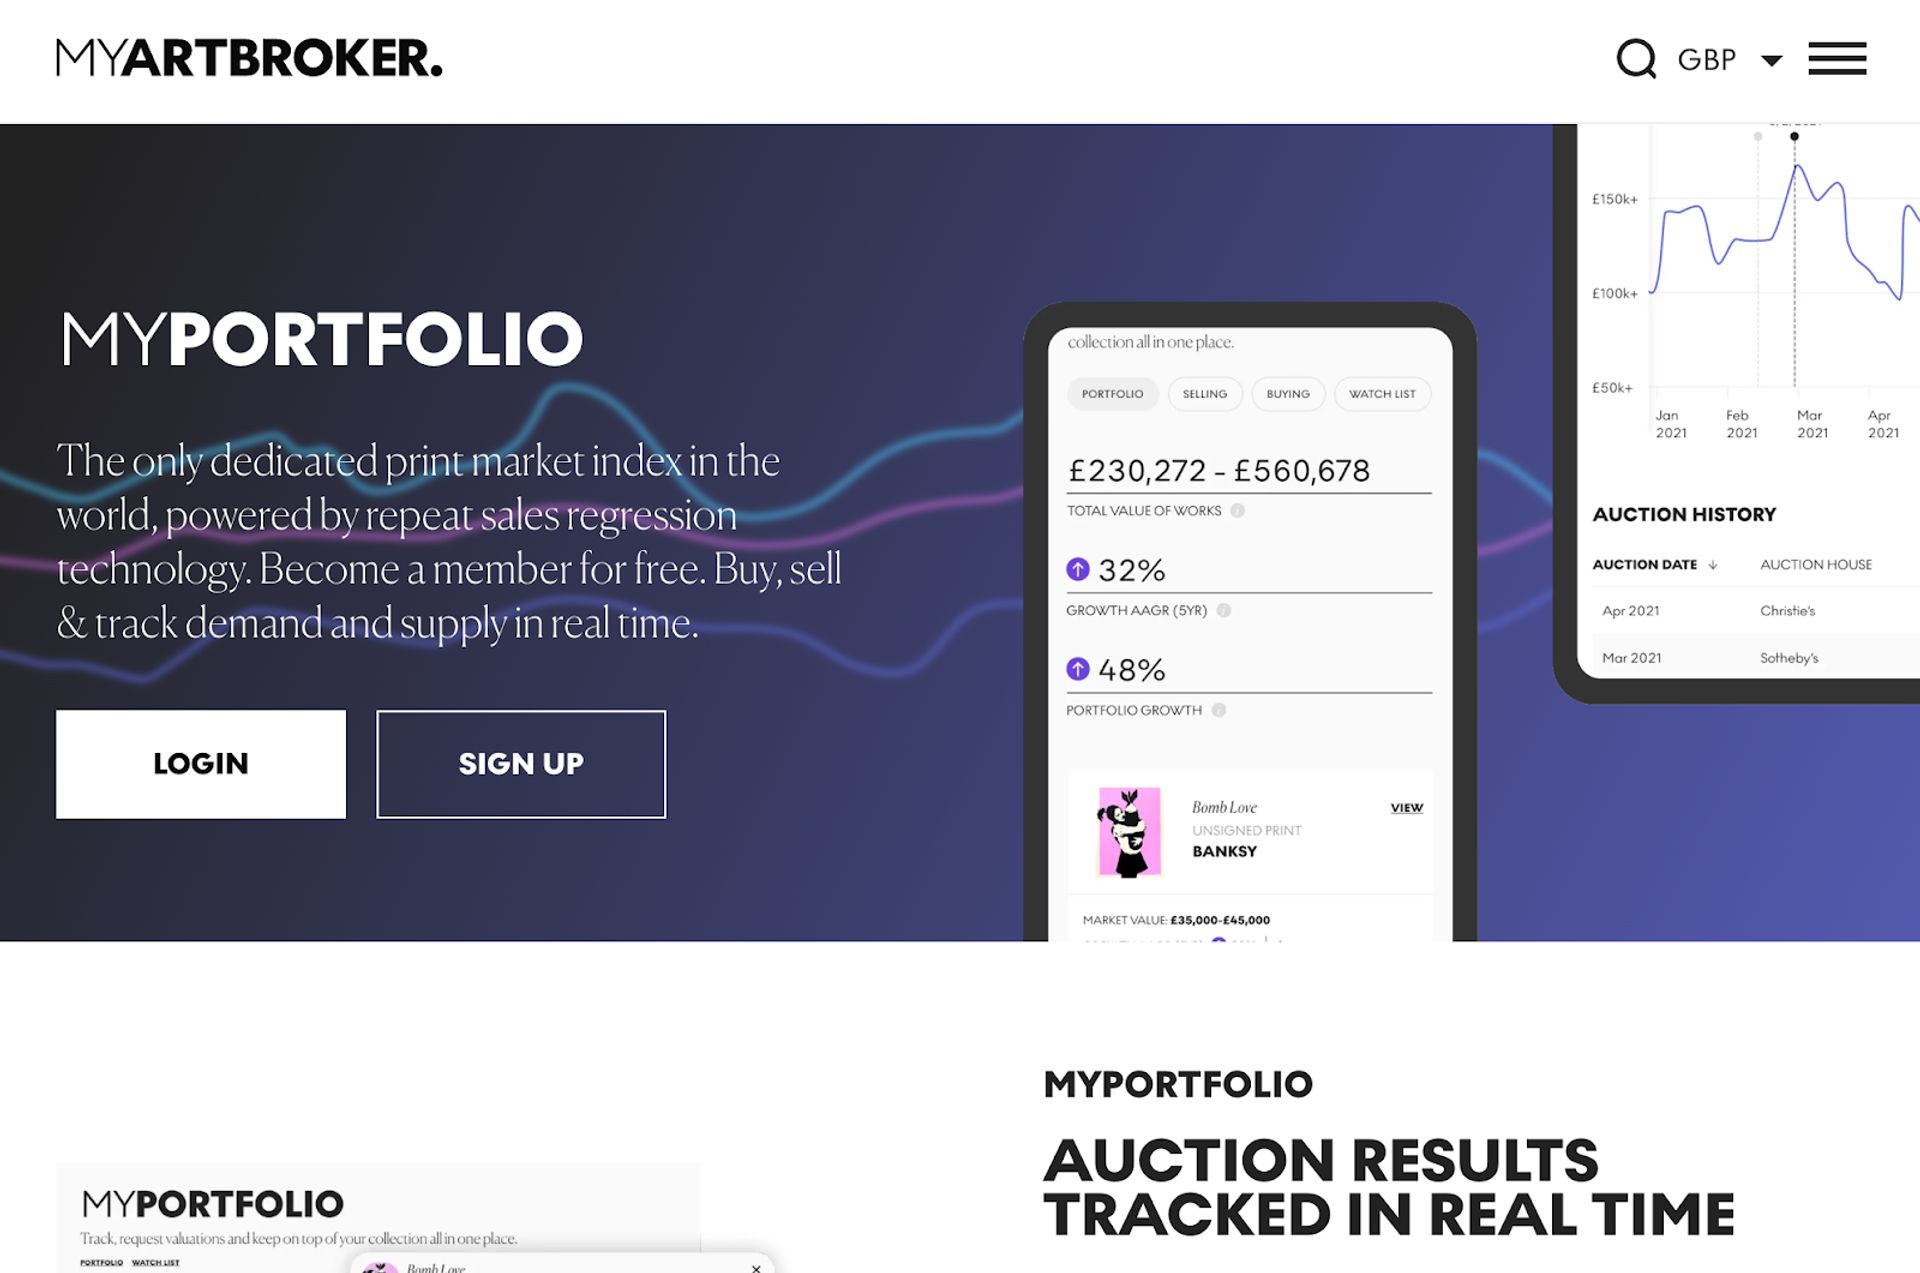 Advertisement for MyArtBroker's MyPortfolio feature showcasing real-time tracking of art auction results.